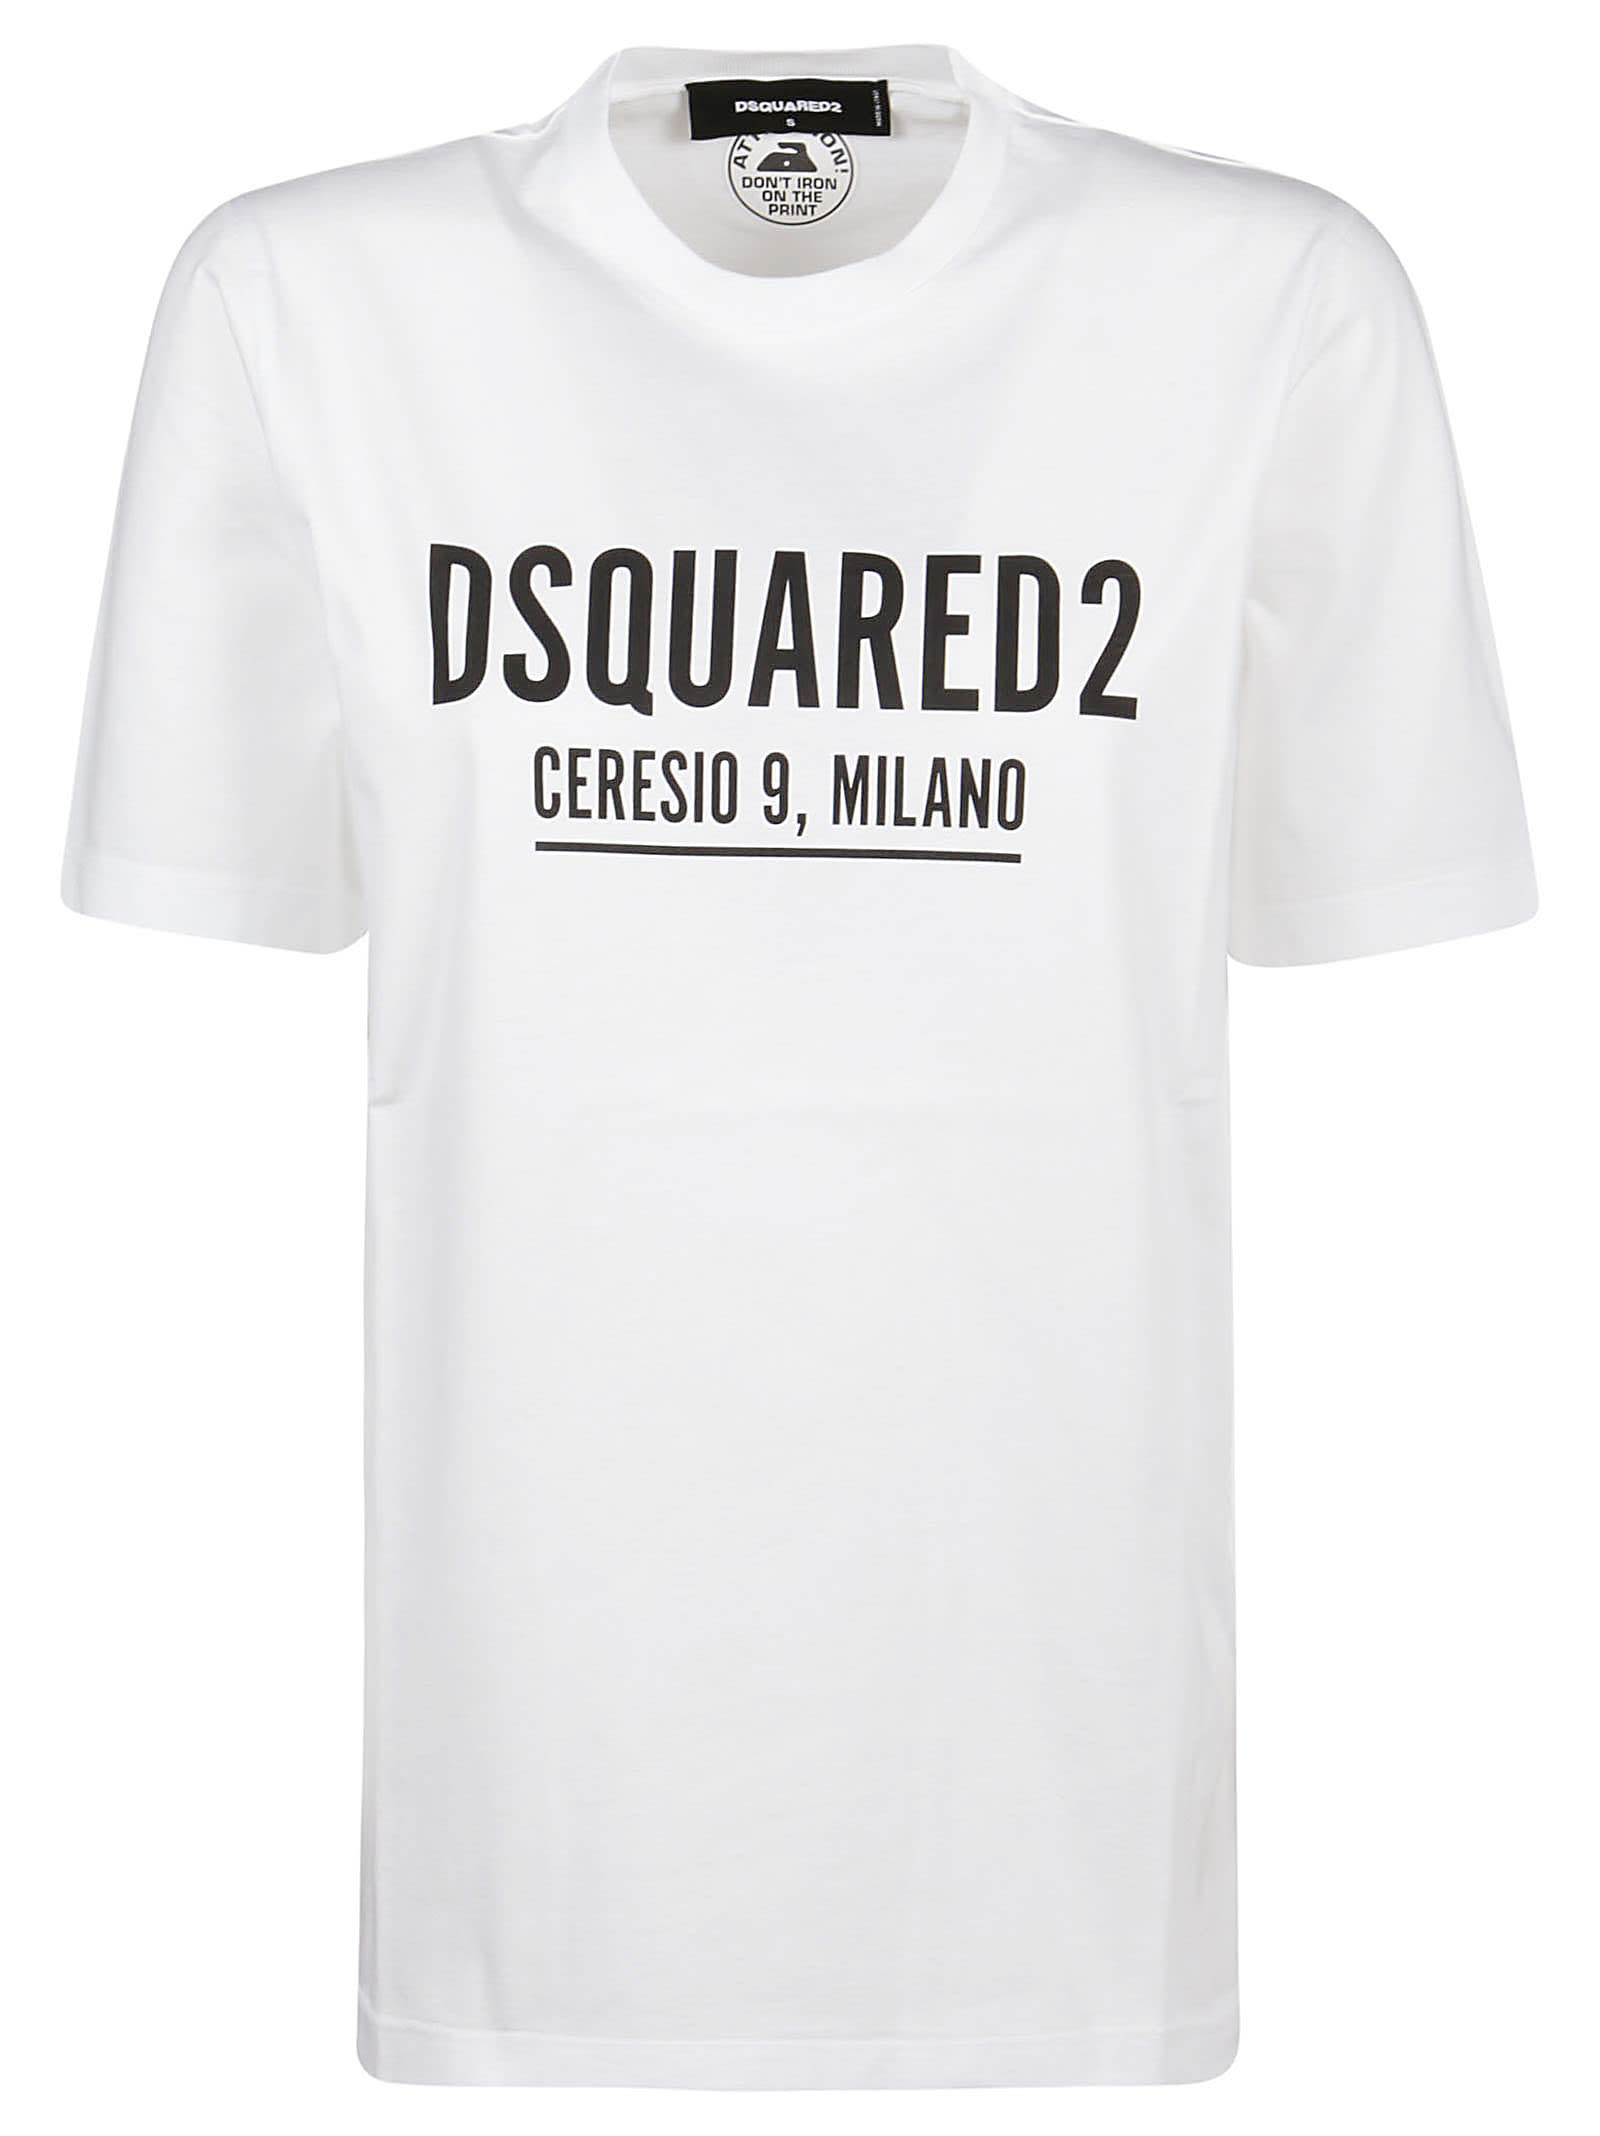 Dsquared2 Ceresio9 Renny T-shirt